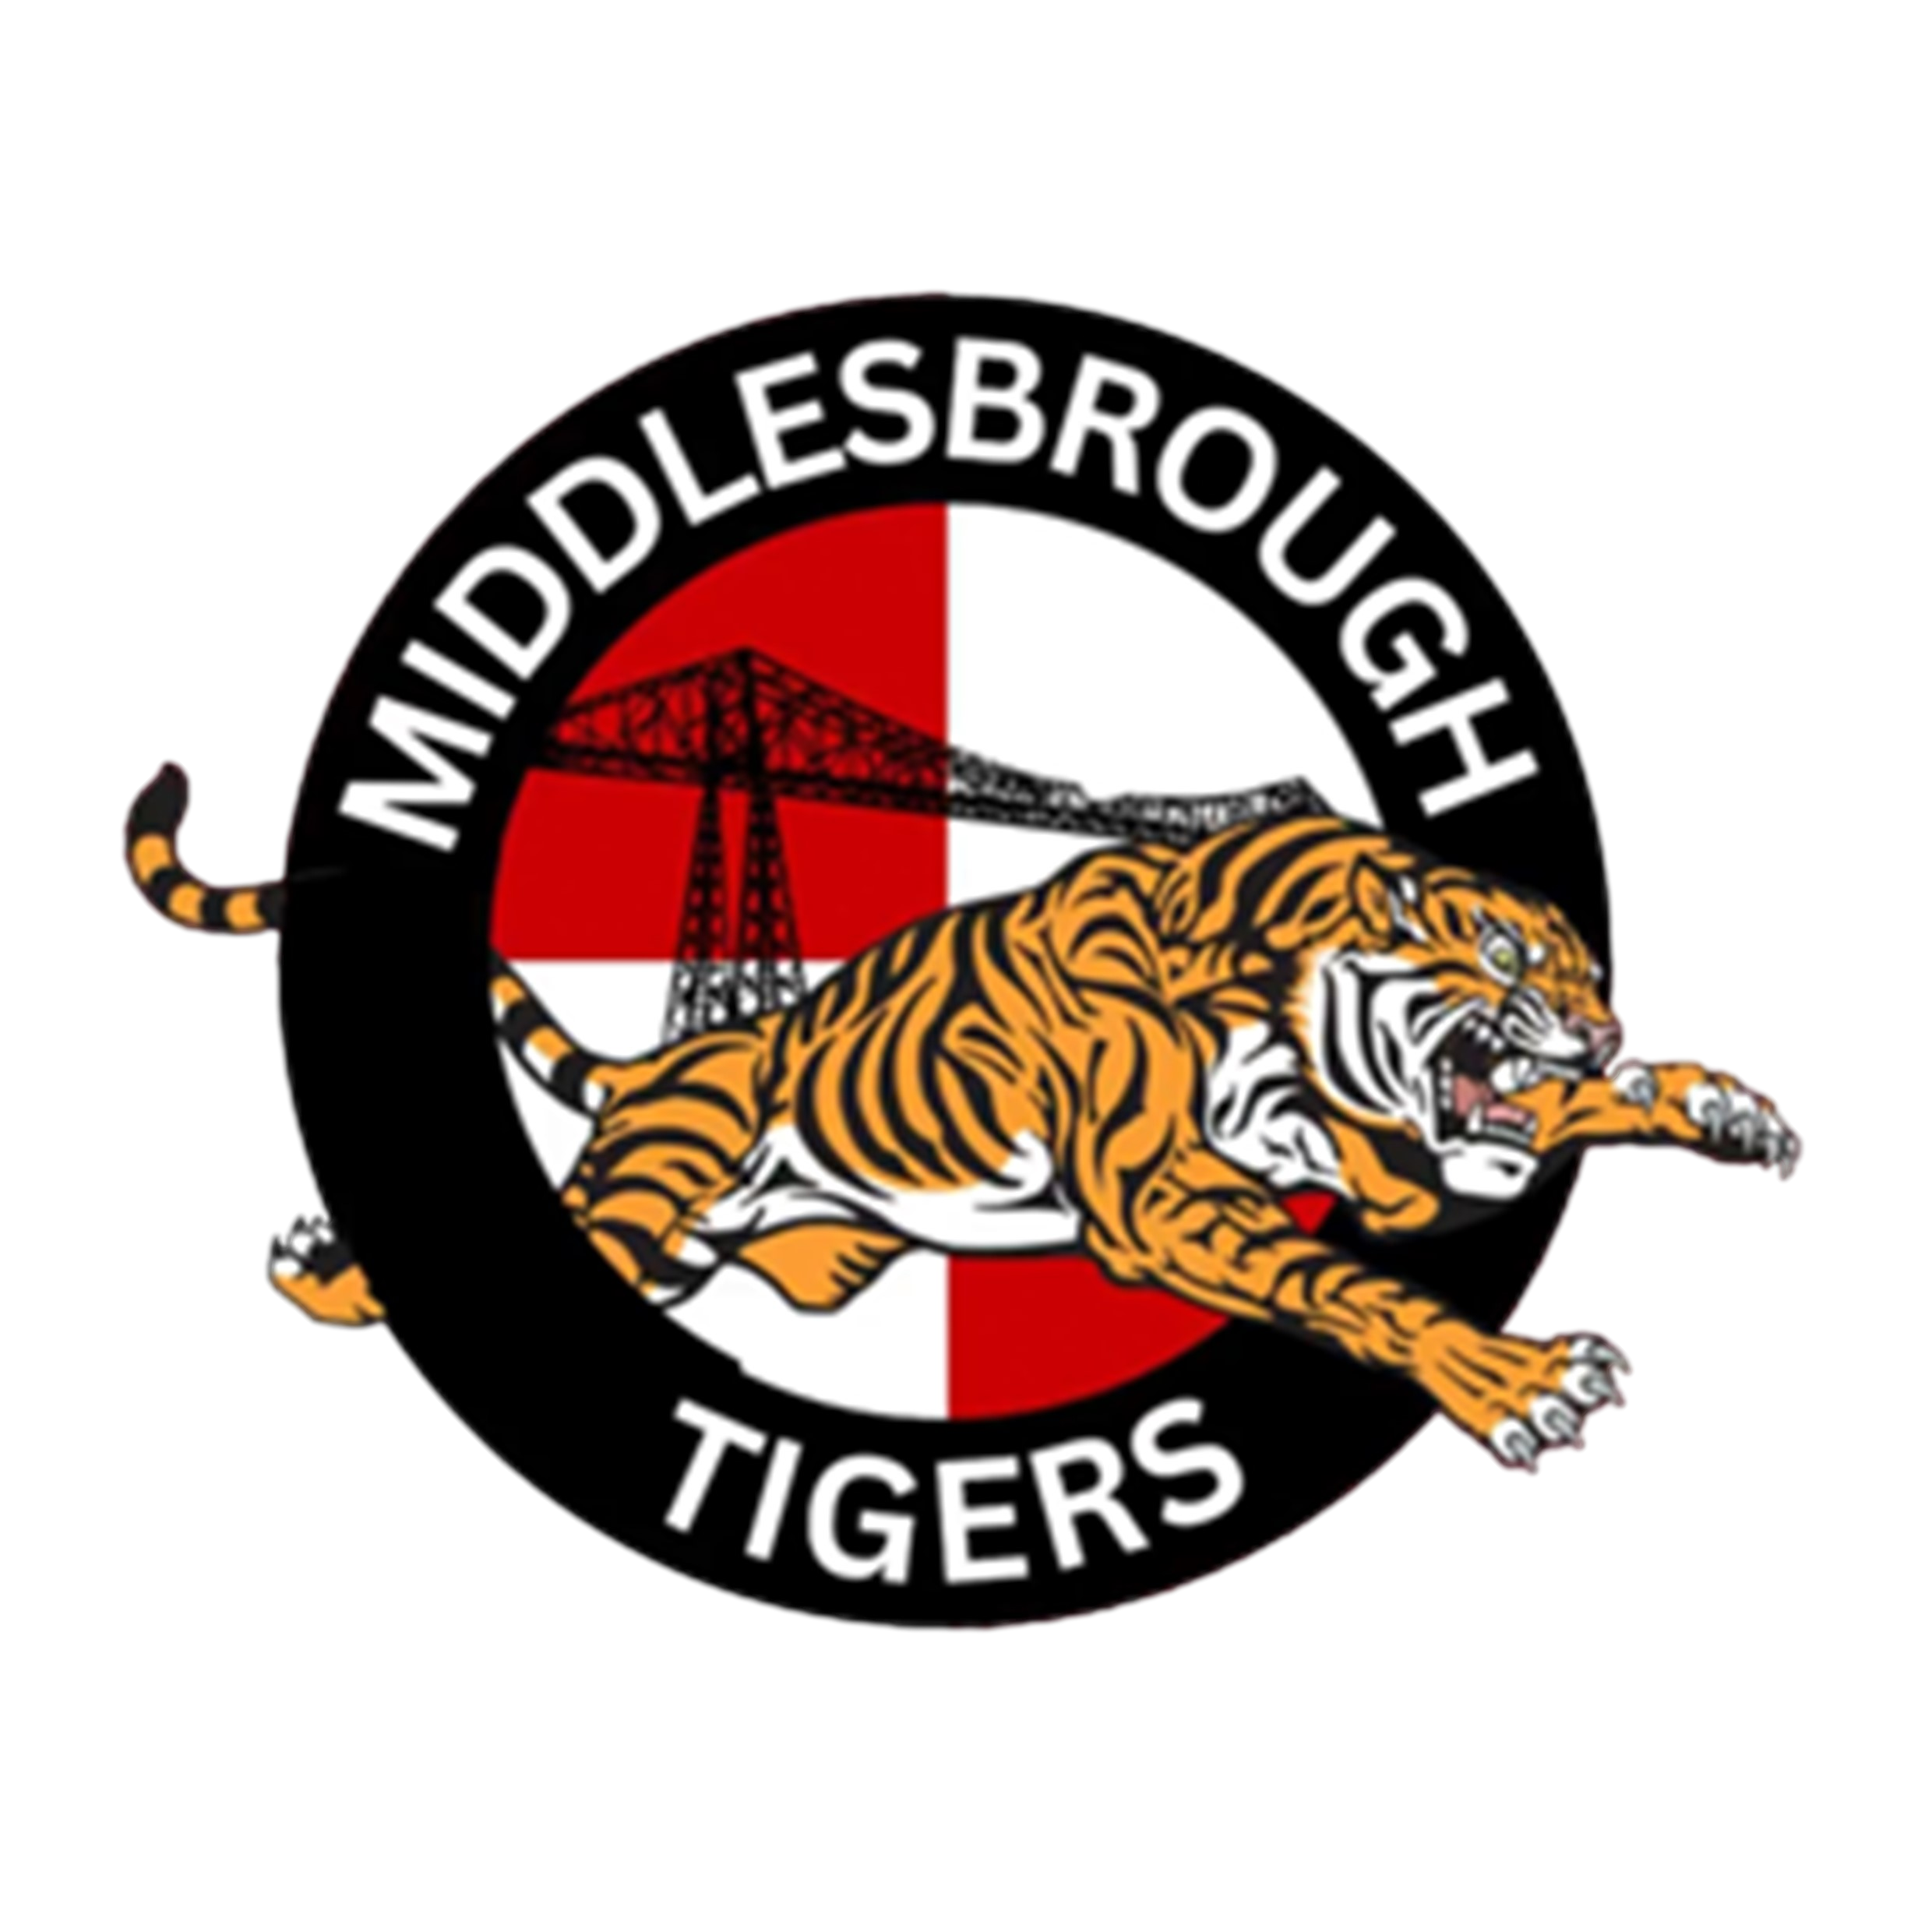 Middlesbrough Tigers